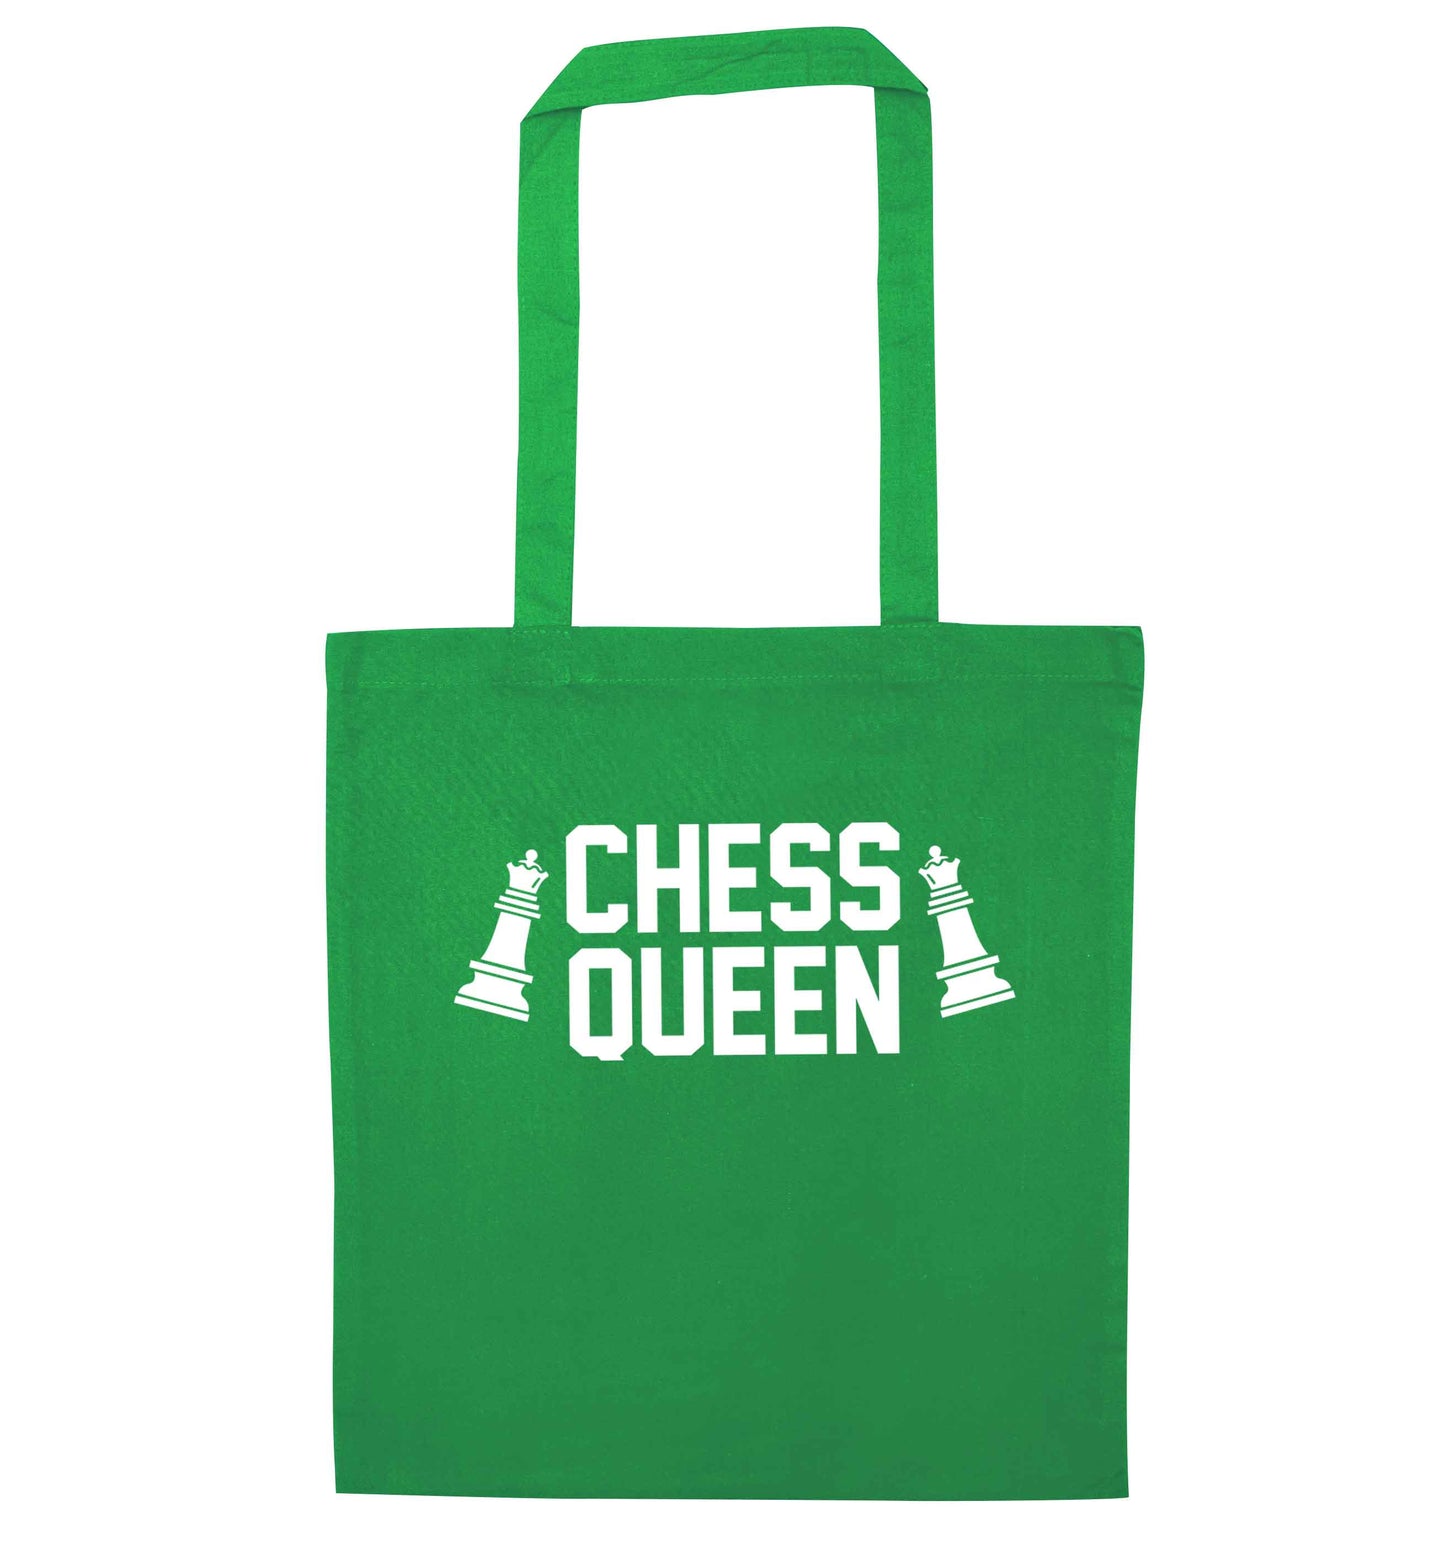 Chess queen green tote bag